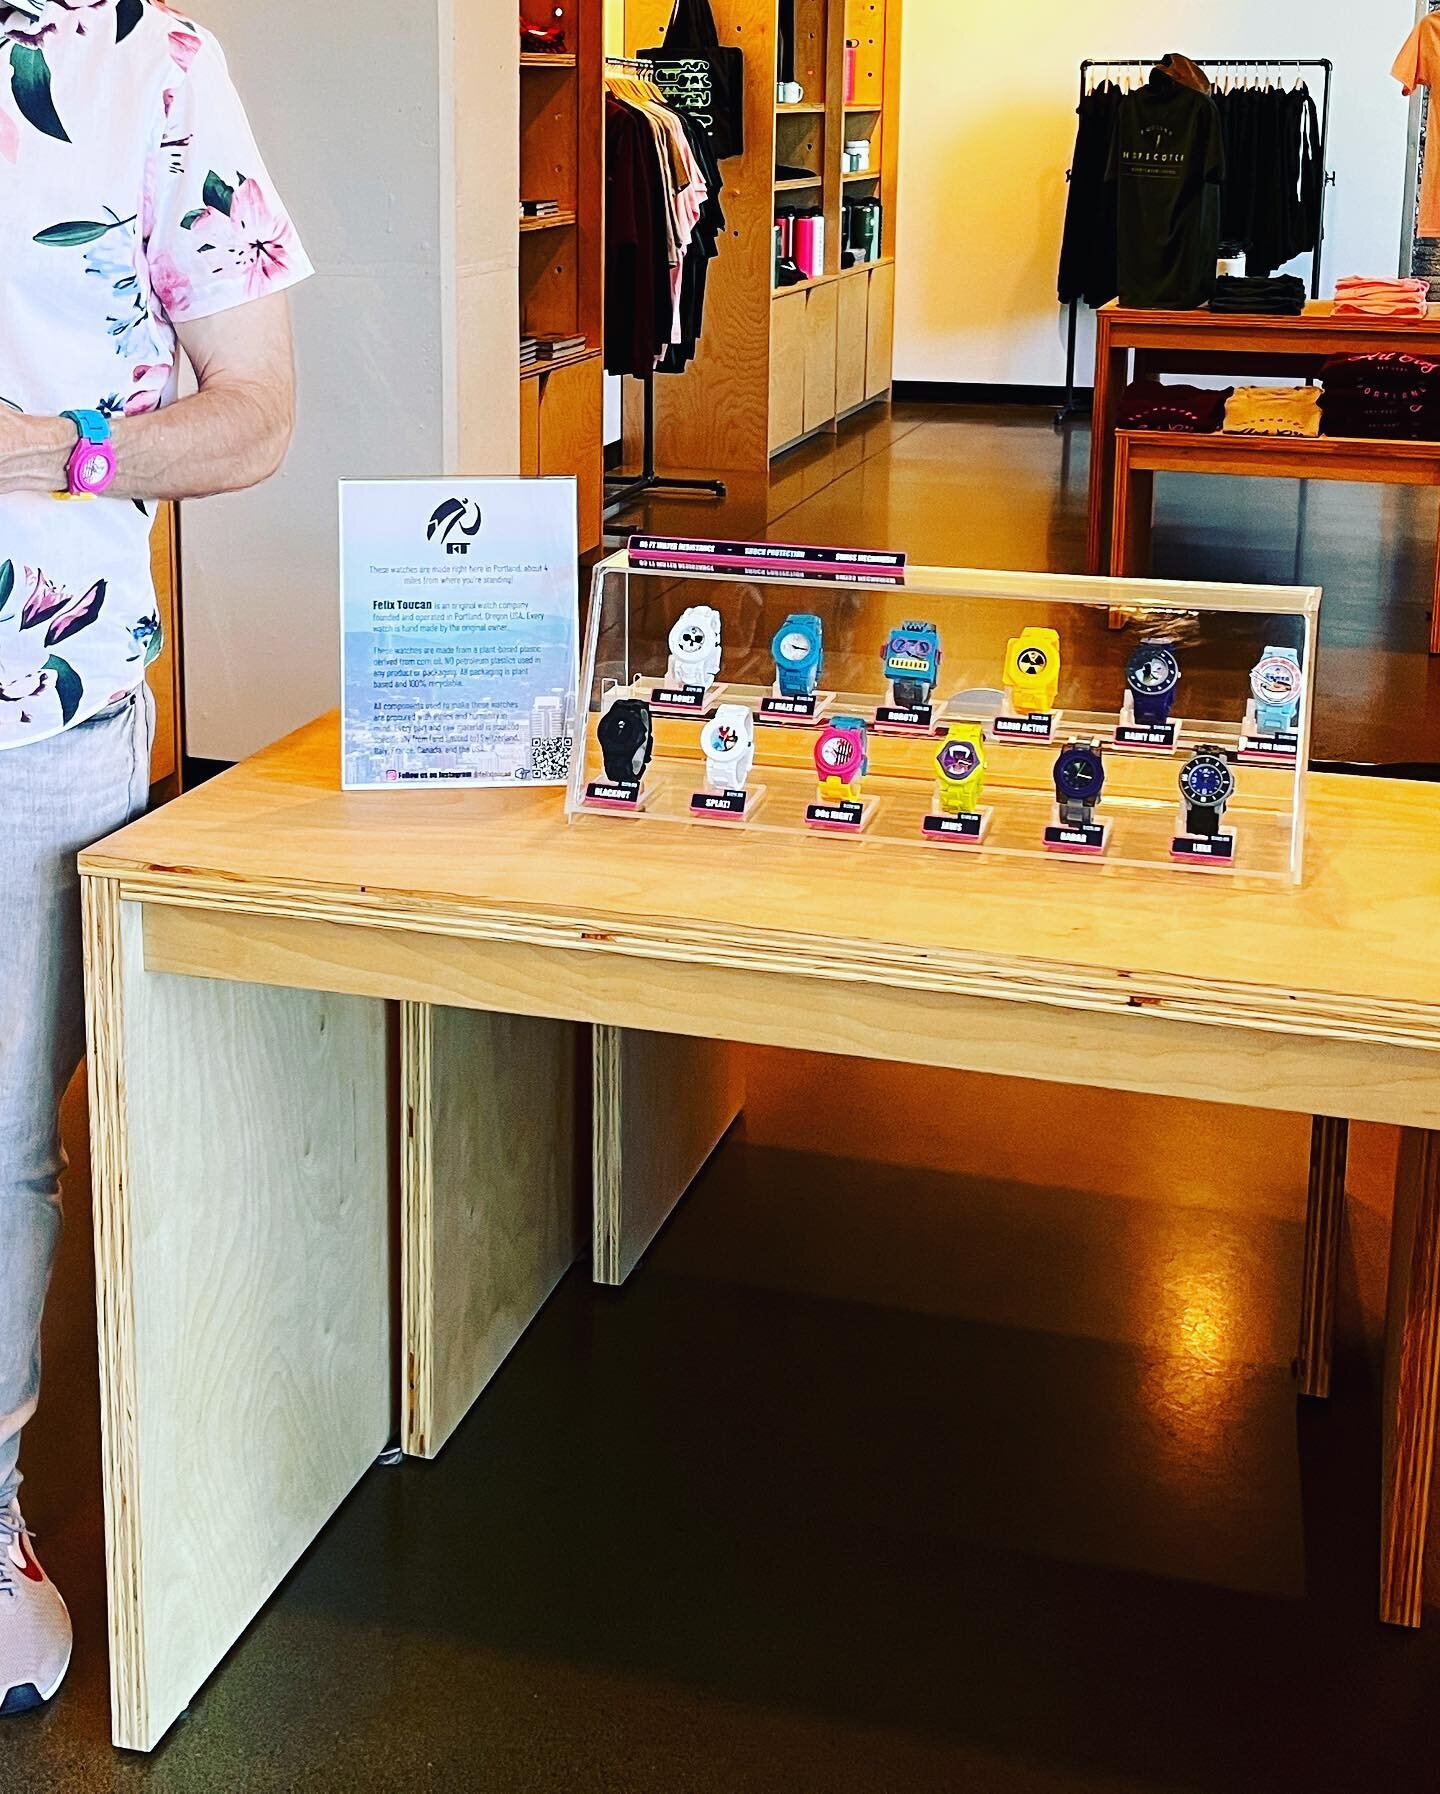 Check it out - we&rsquo;re on sale in Hopscotch Portland&rsquo;s gift shop! 

 
#3dprinting #3dprinted #3dprintedwatch #3dprintedwatches #watchfam#pdx #pnw #portland #portlandoregon  #watchesofinstagram #watchaddict #watchcollector #watchlover #watch